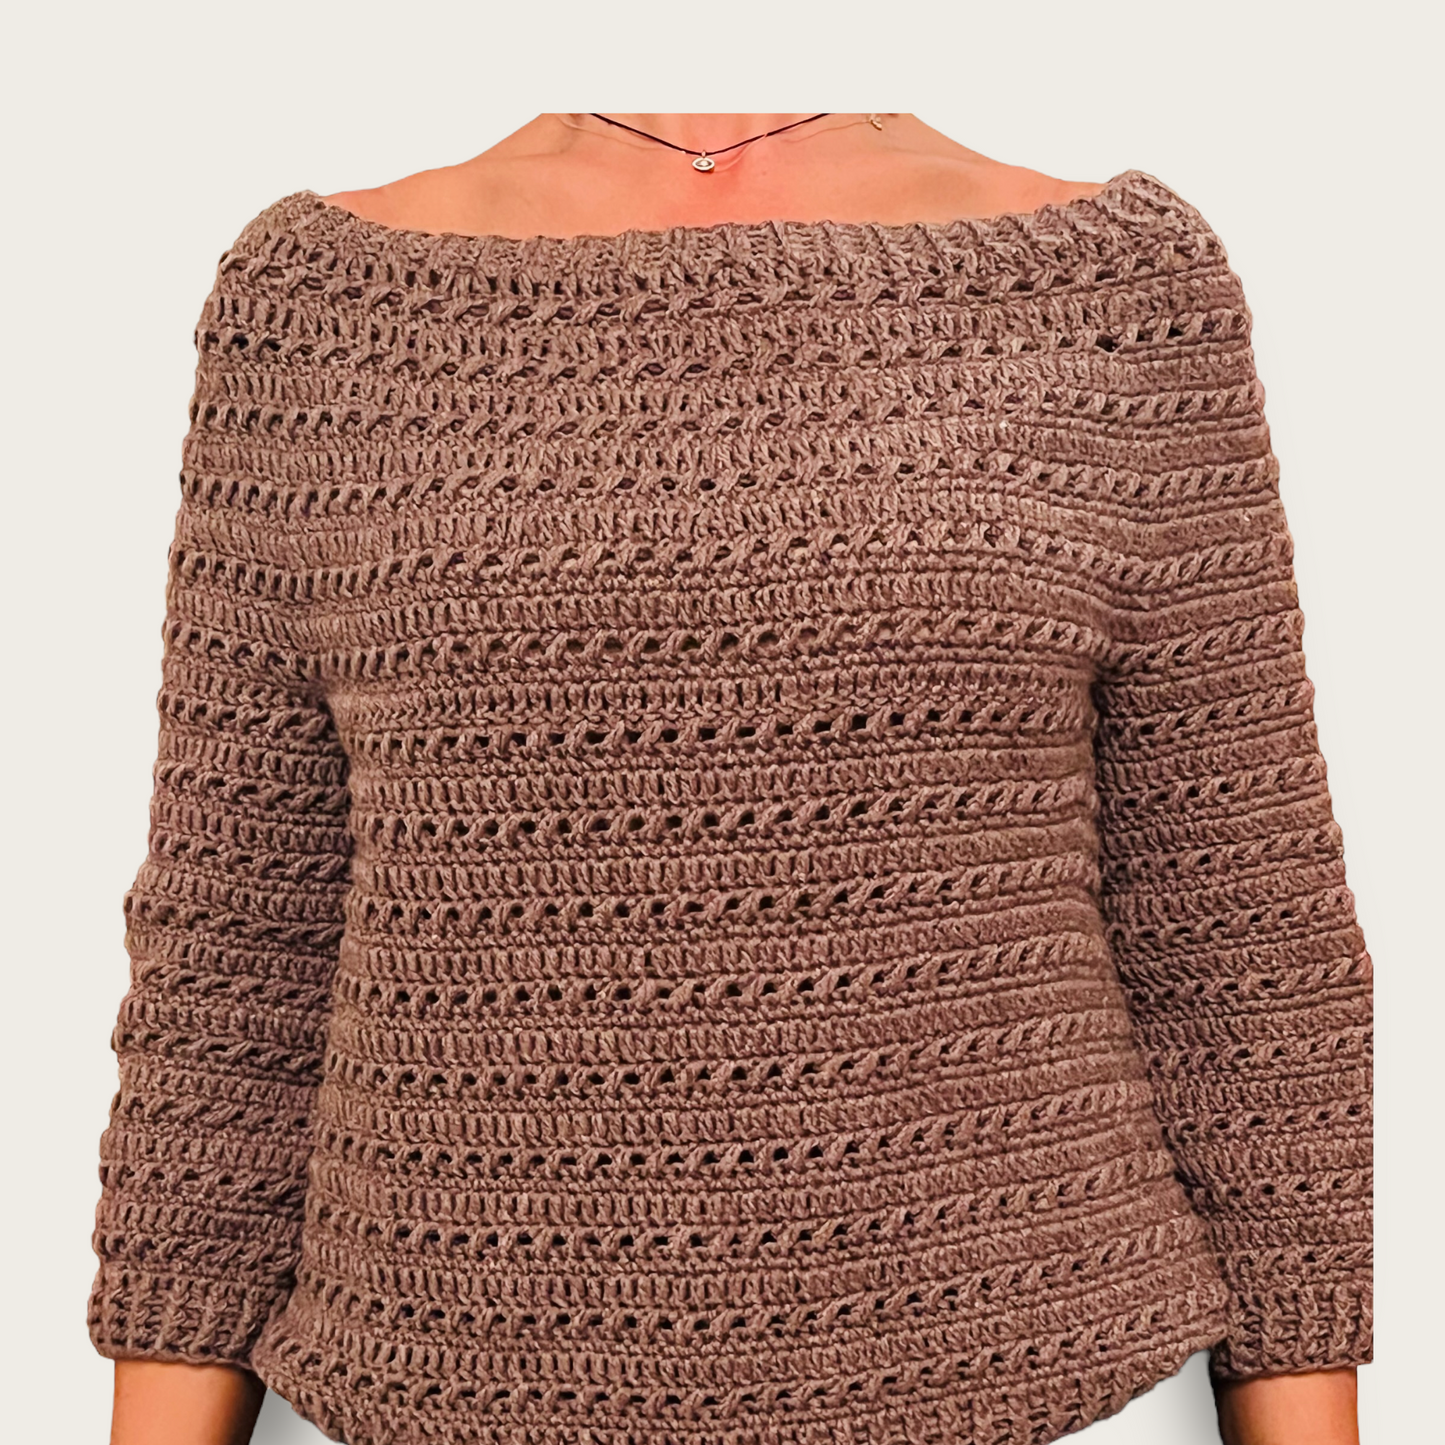 The Brown Sweater